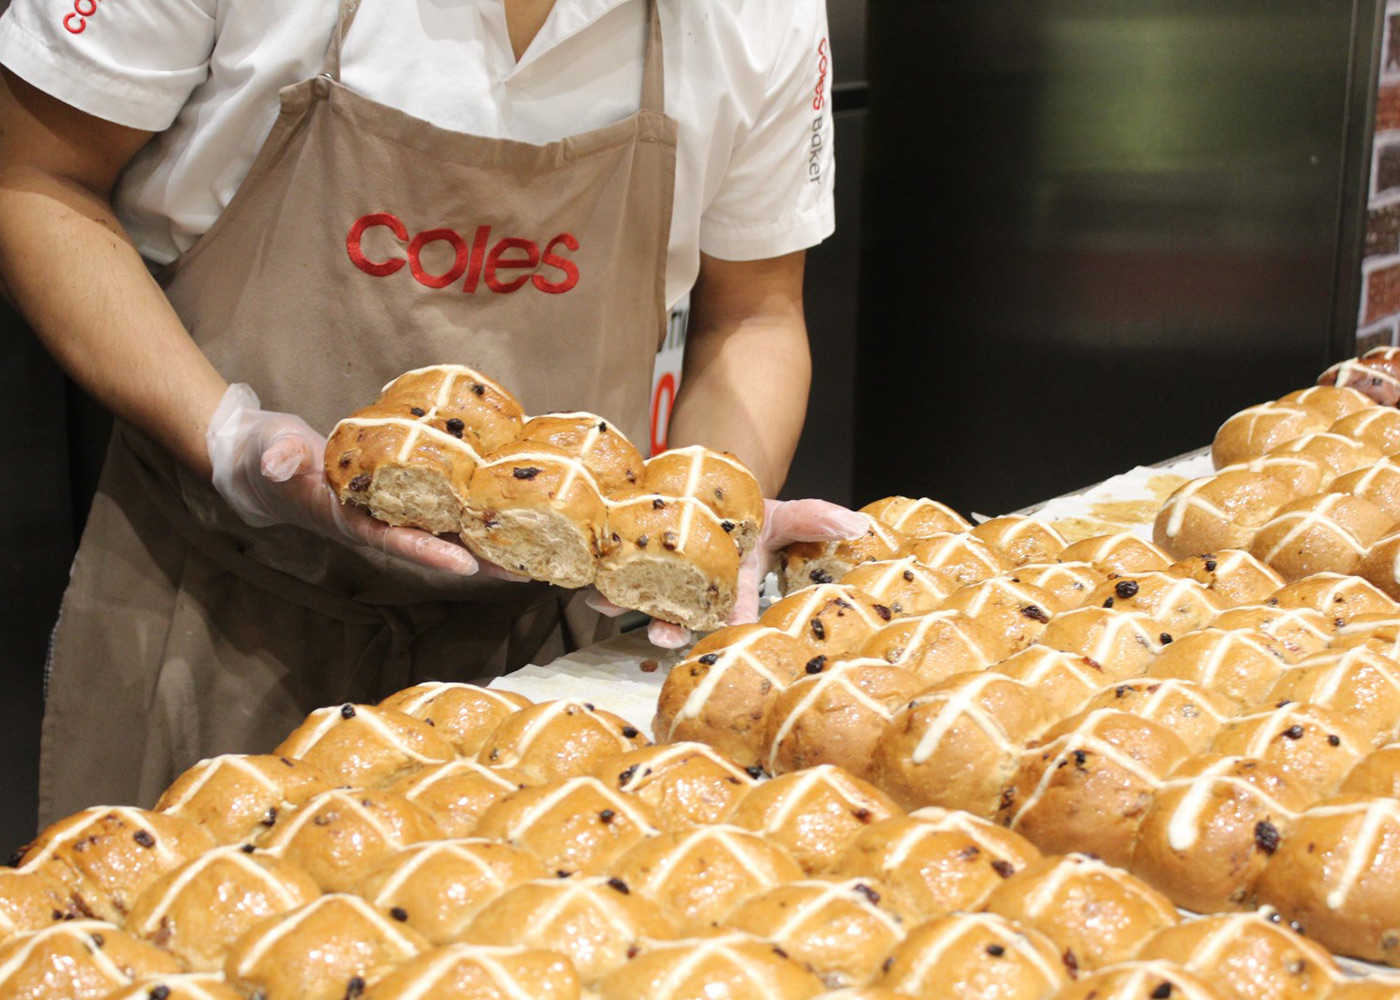 Coles baker with hot cross buns